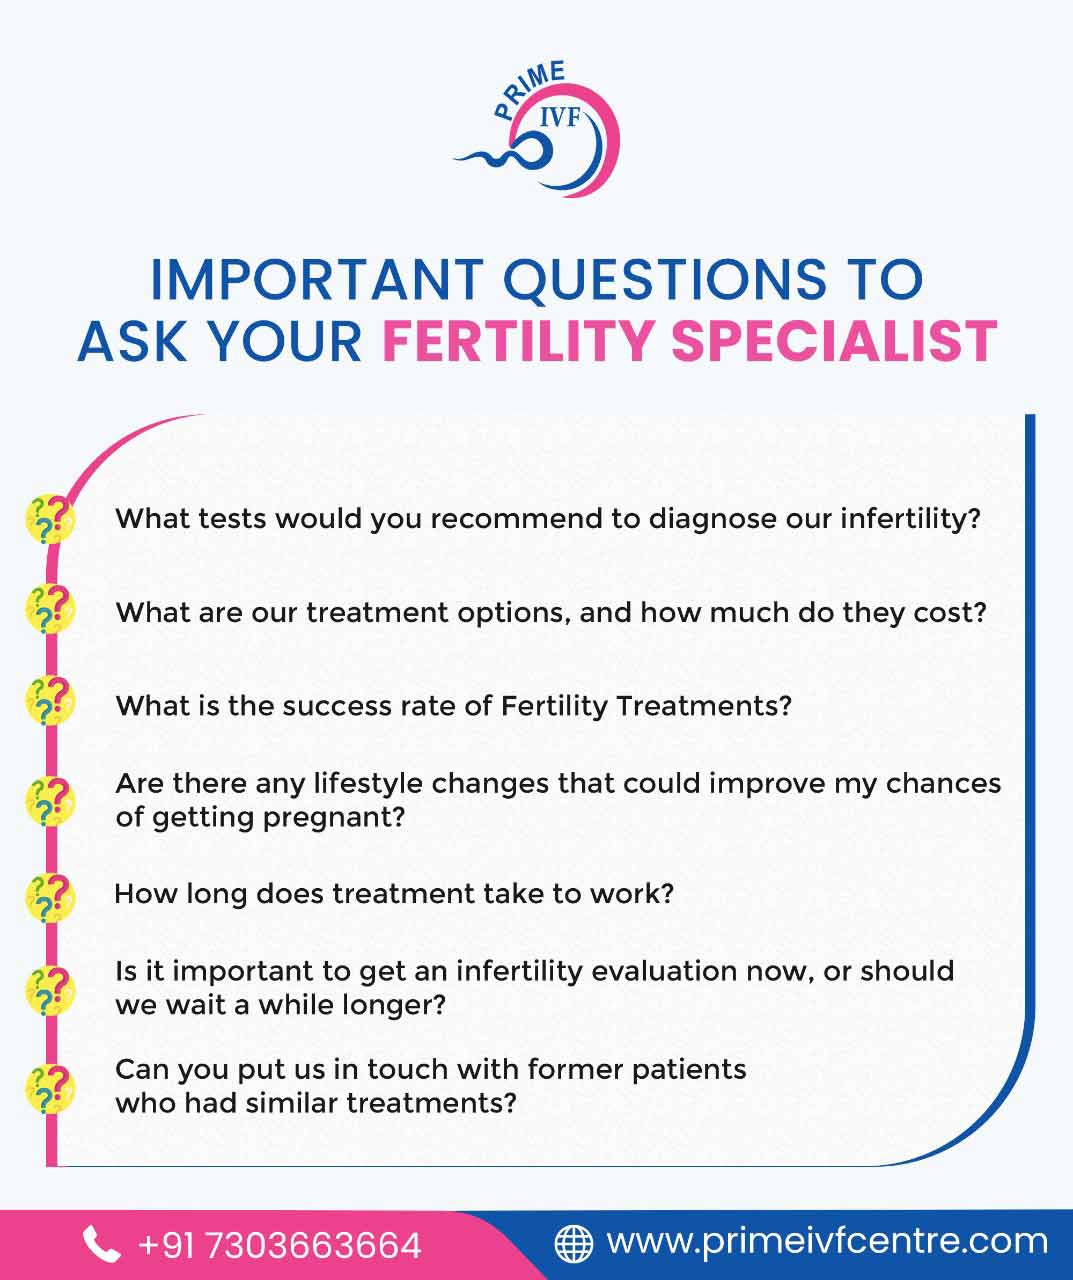 Questions to Ask Your Fertility Specialist